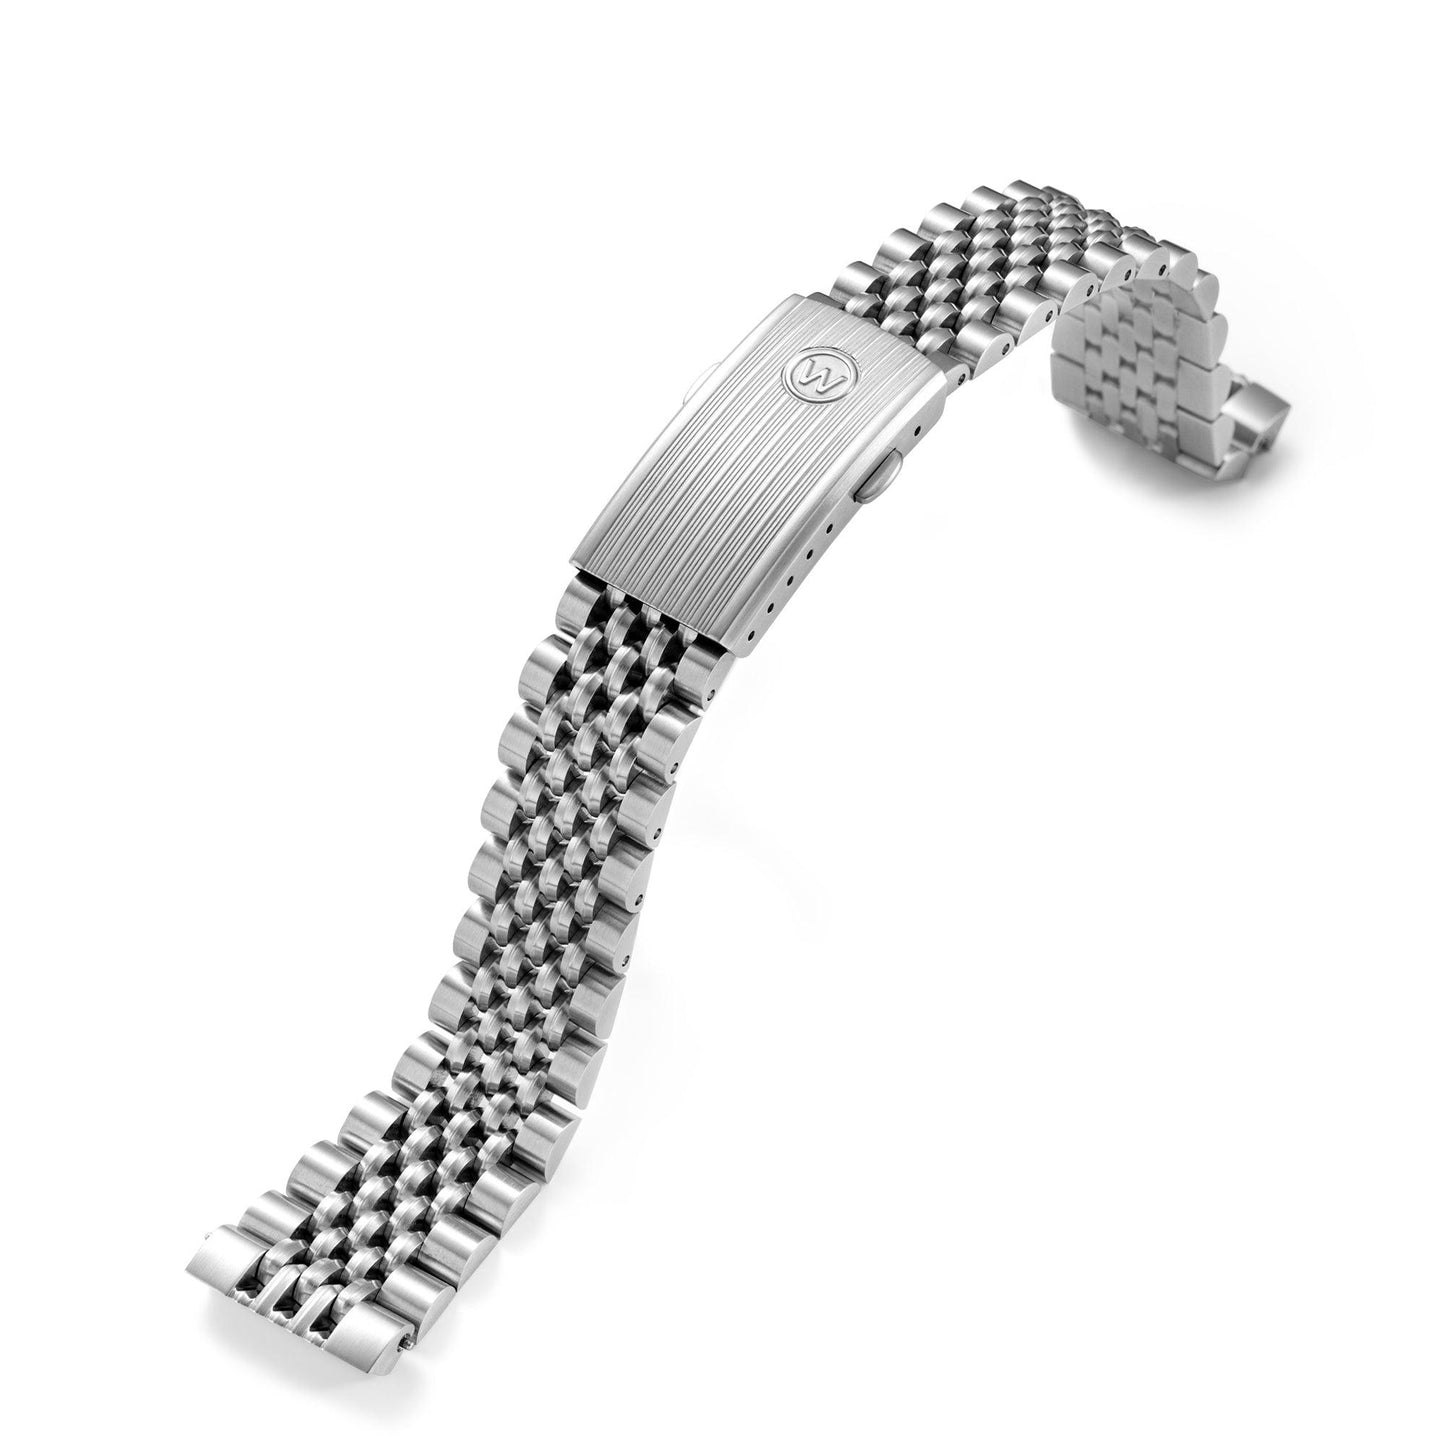 Skindiver WT Professional Bracelet Tool-Watch - White & Steel - New! Now with 8315 Movement! - Wolbrook Watches